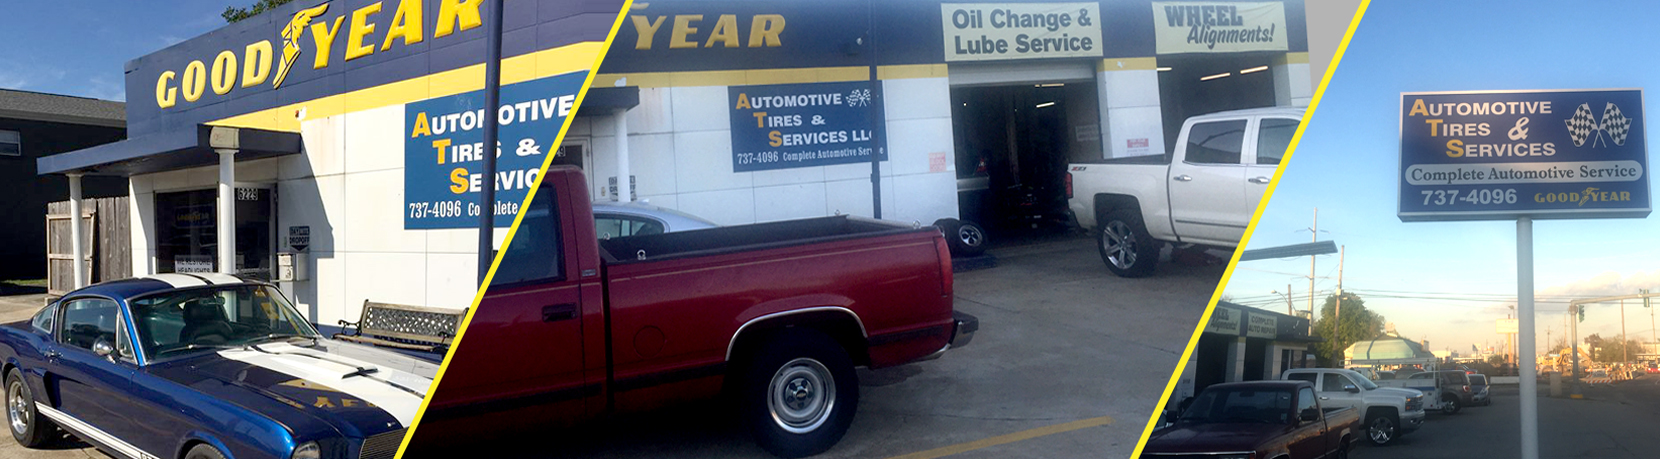 Automotive Tires and Services LLC